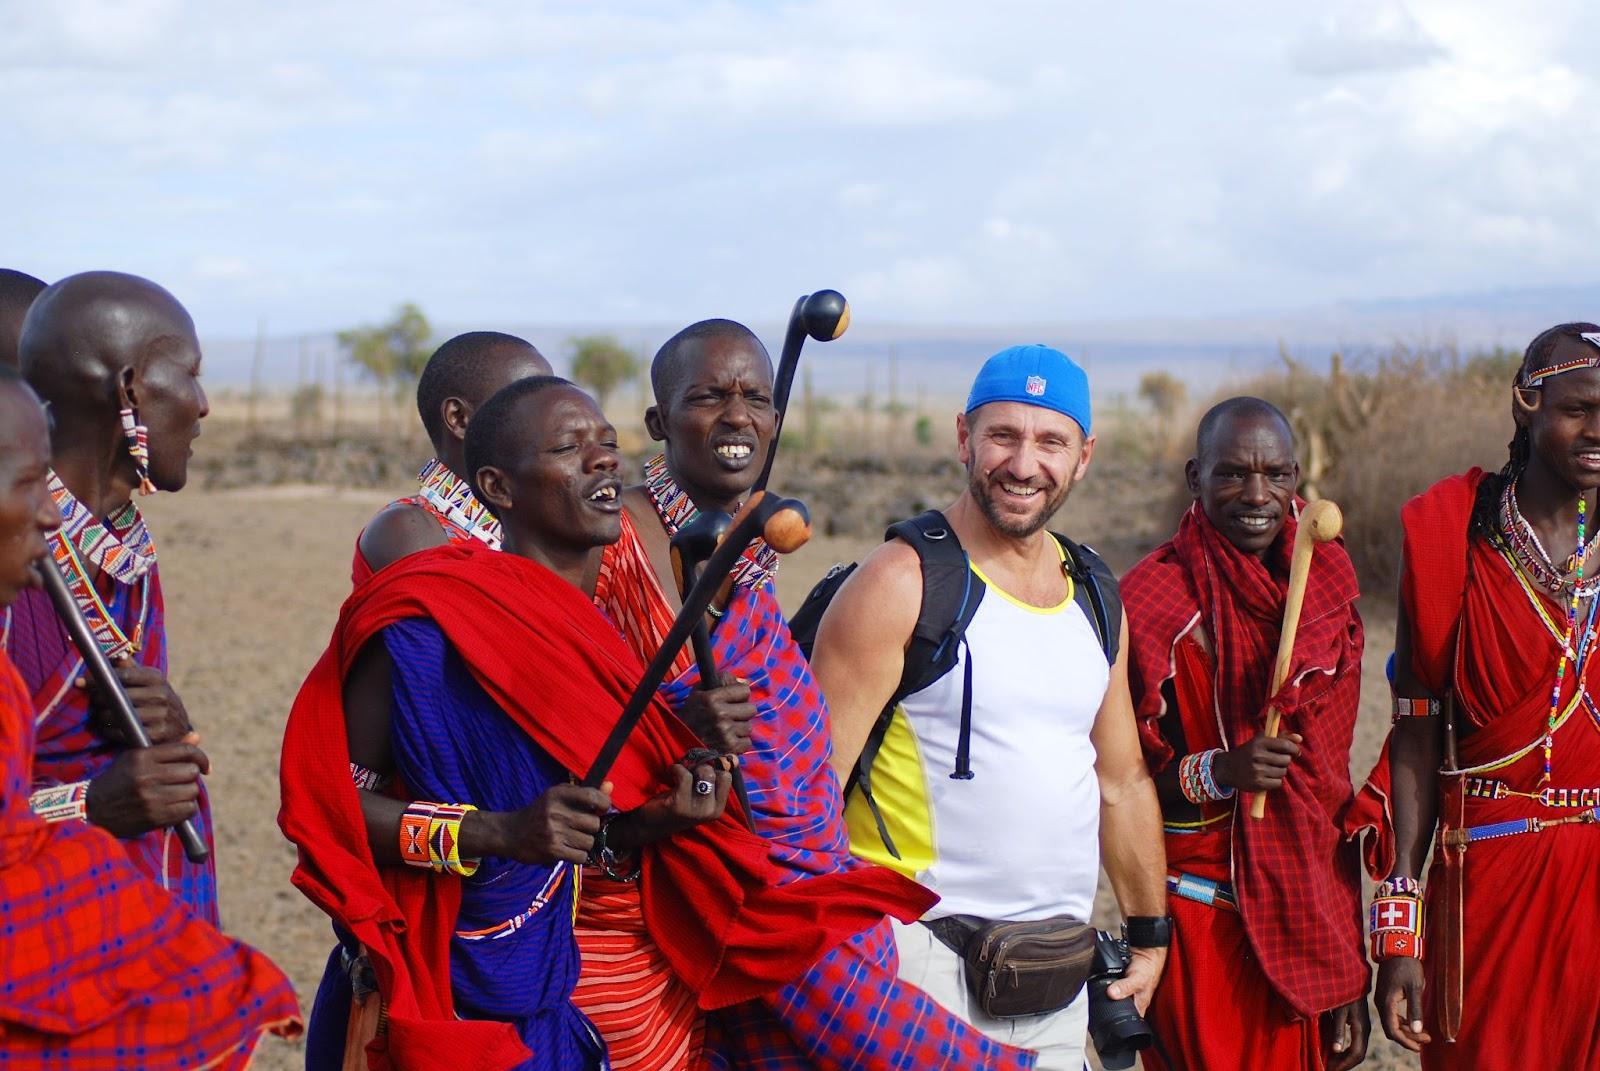 African men from Masai tribe dance with a tourist during a traditional show supporting the local economy